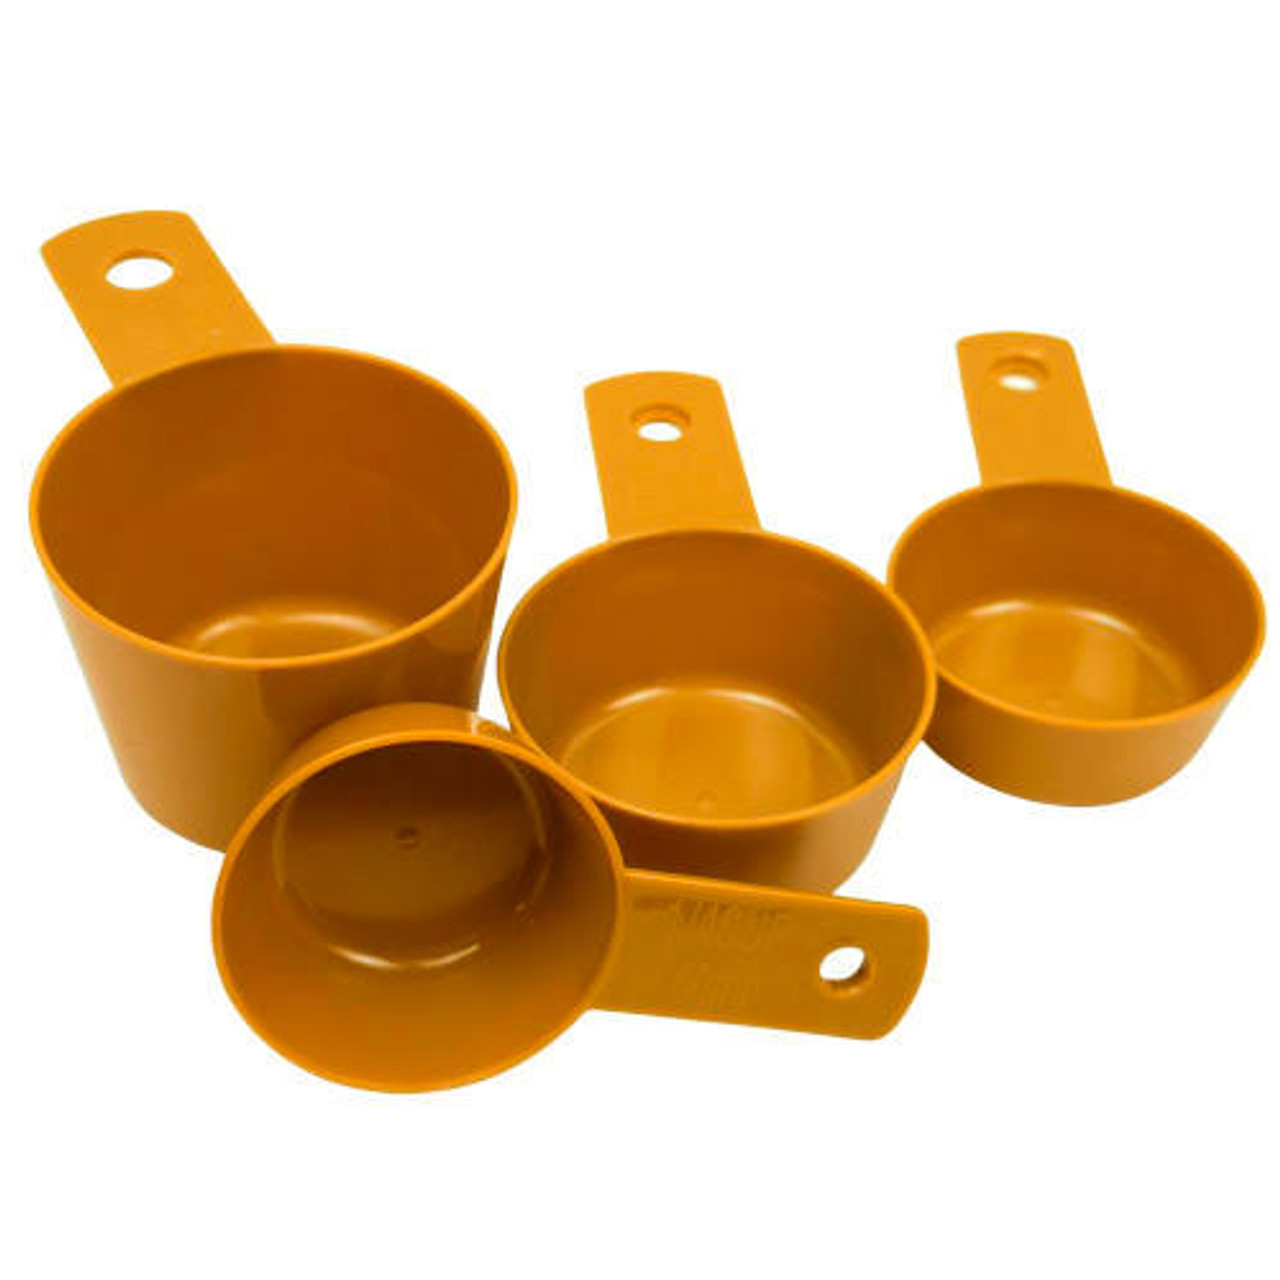 Stoneware Measuring Cups, Set of 3 1 Pc.